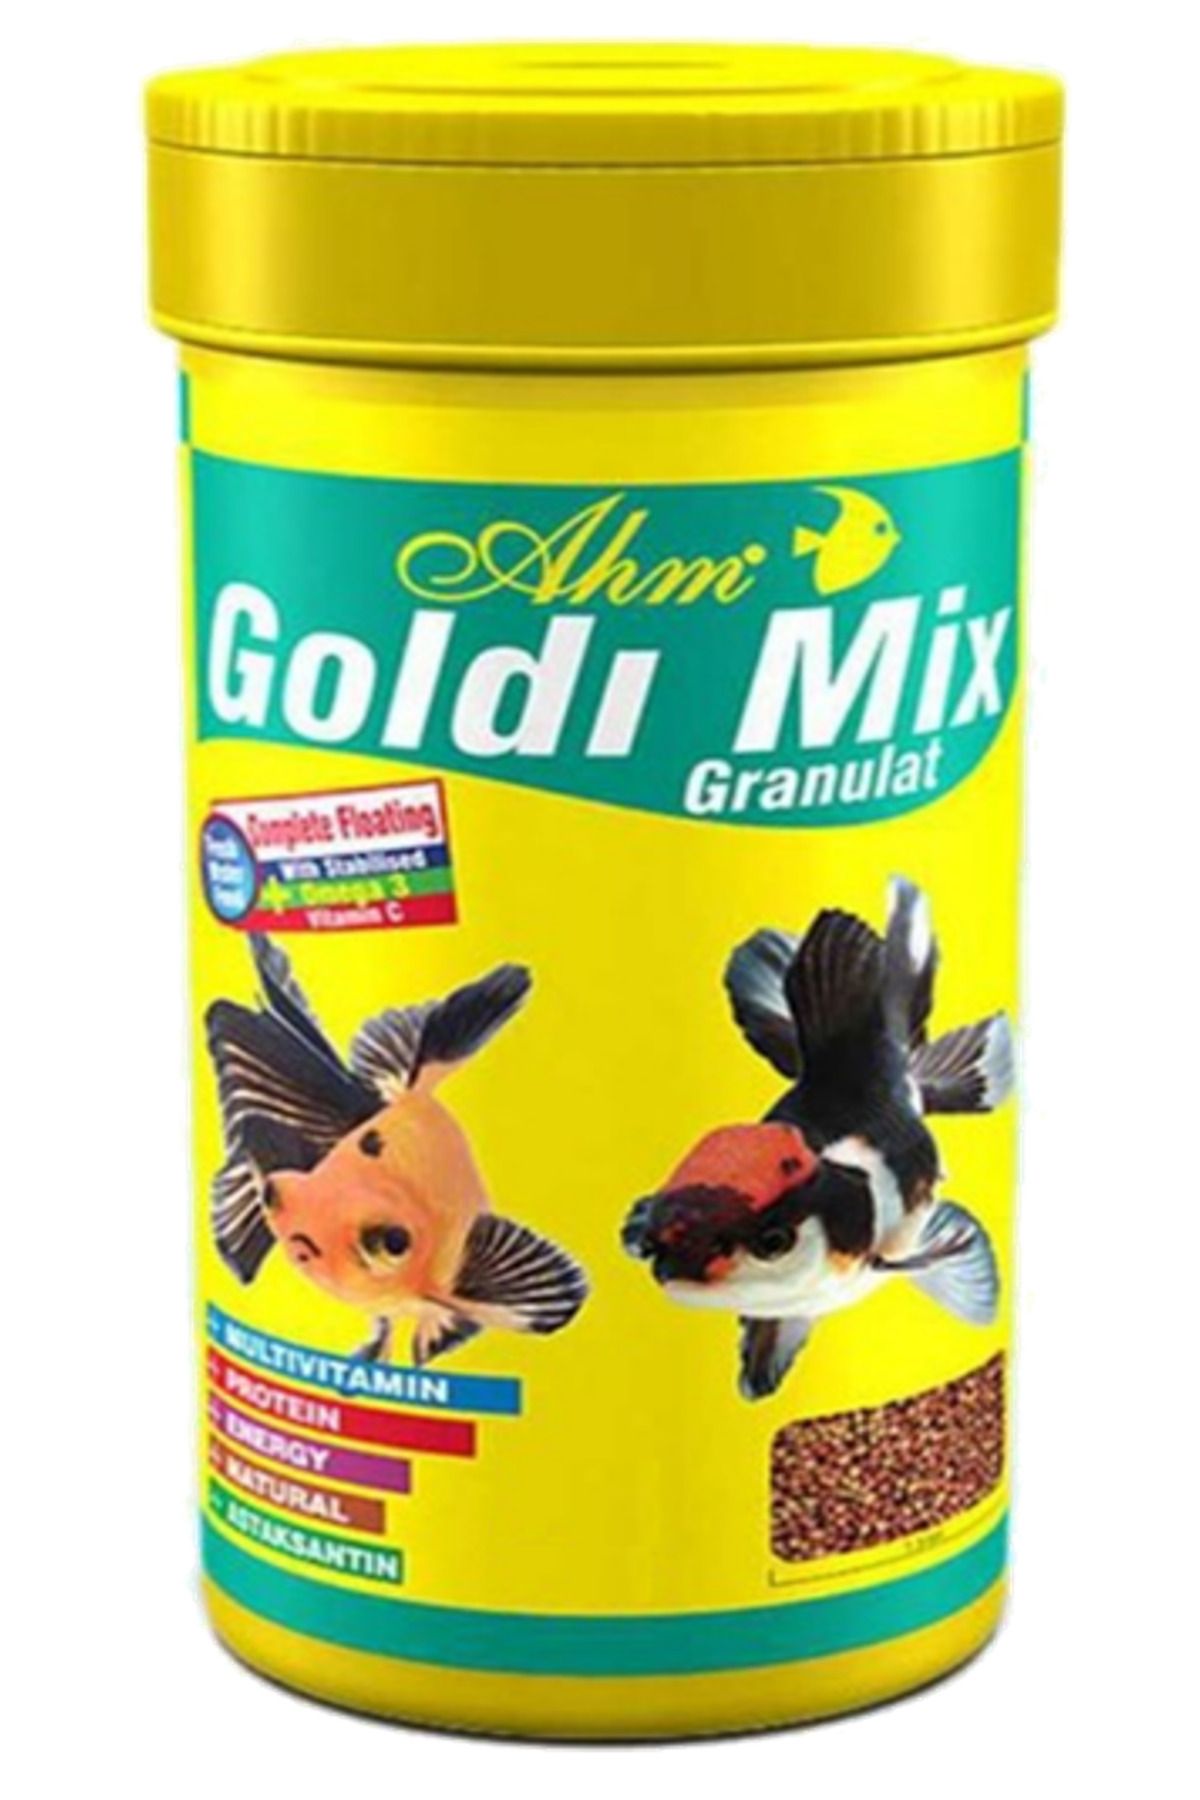 Amore Goldy Mix %37 Protein 250 gr Easy-Fill-Pack ve 1000 ml Box AHM Gold Mix Japon Balik Yemi